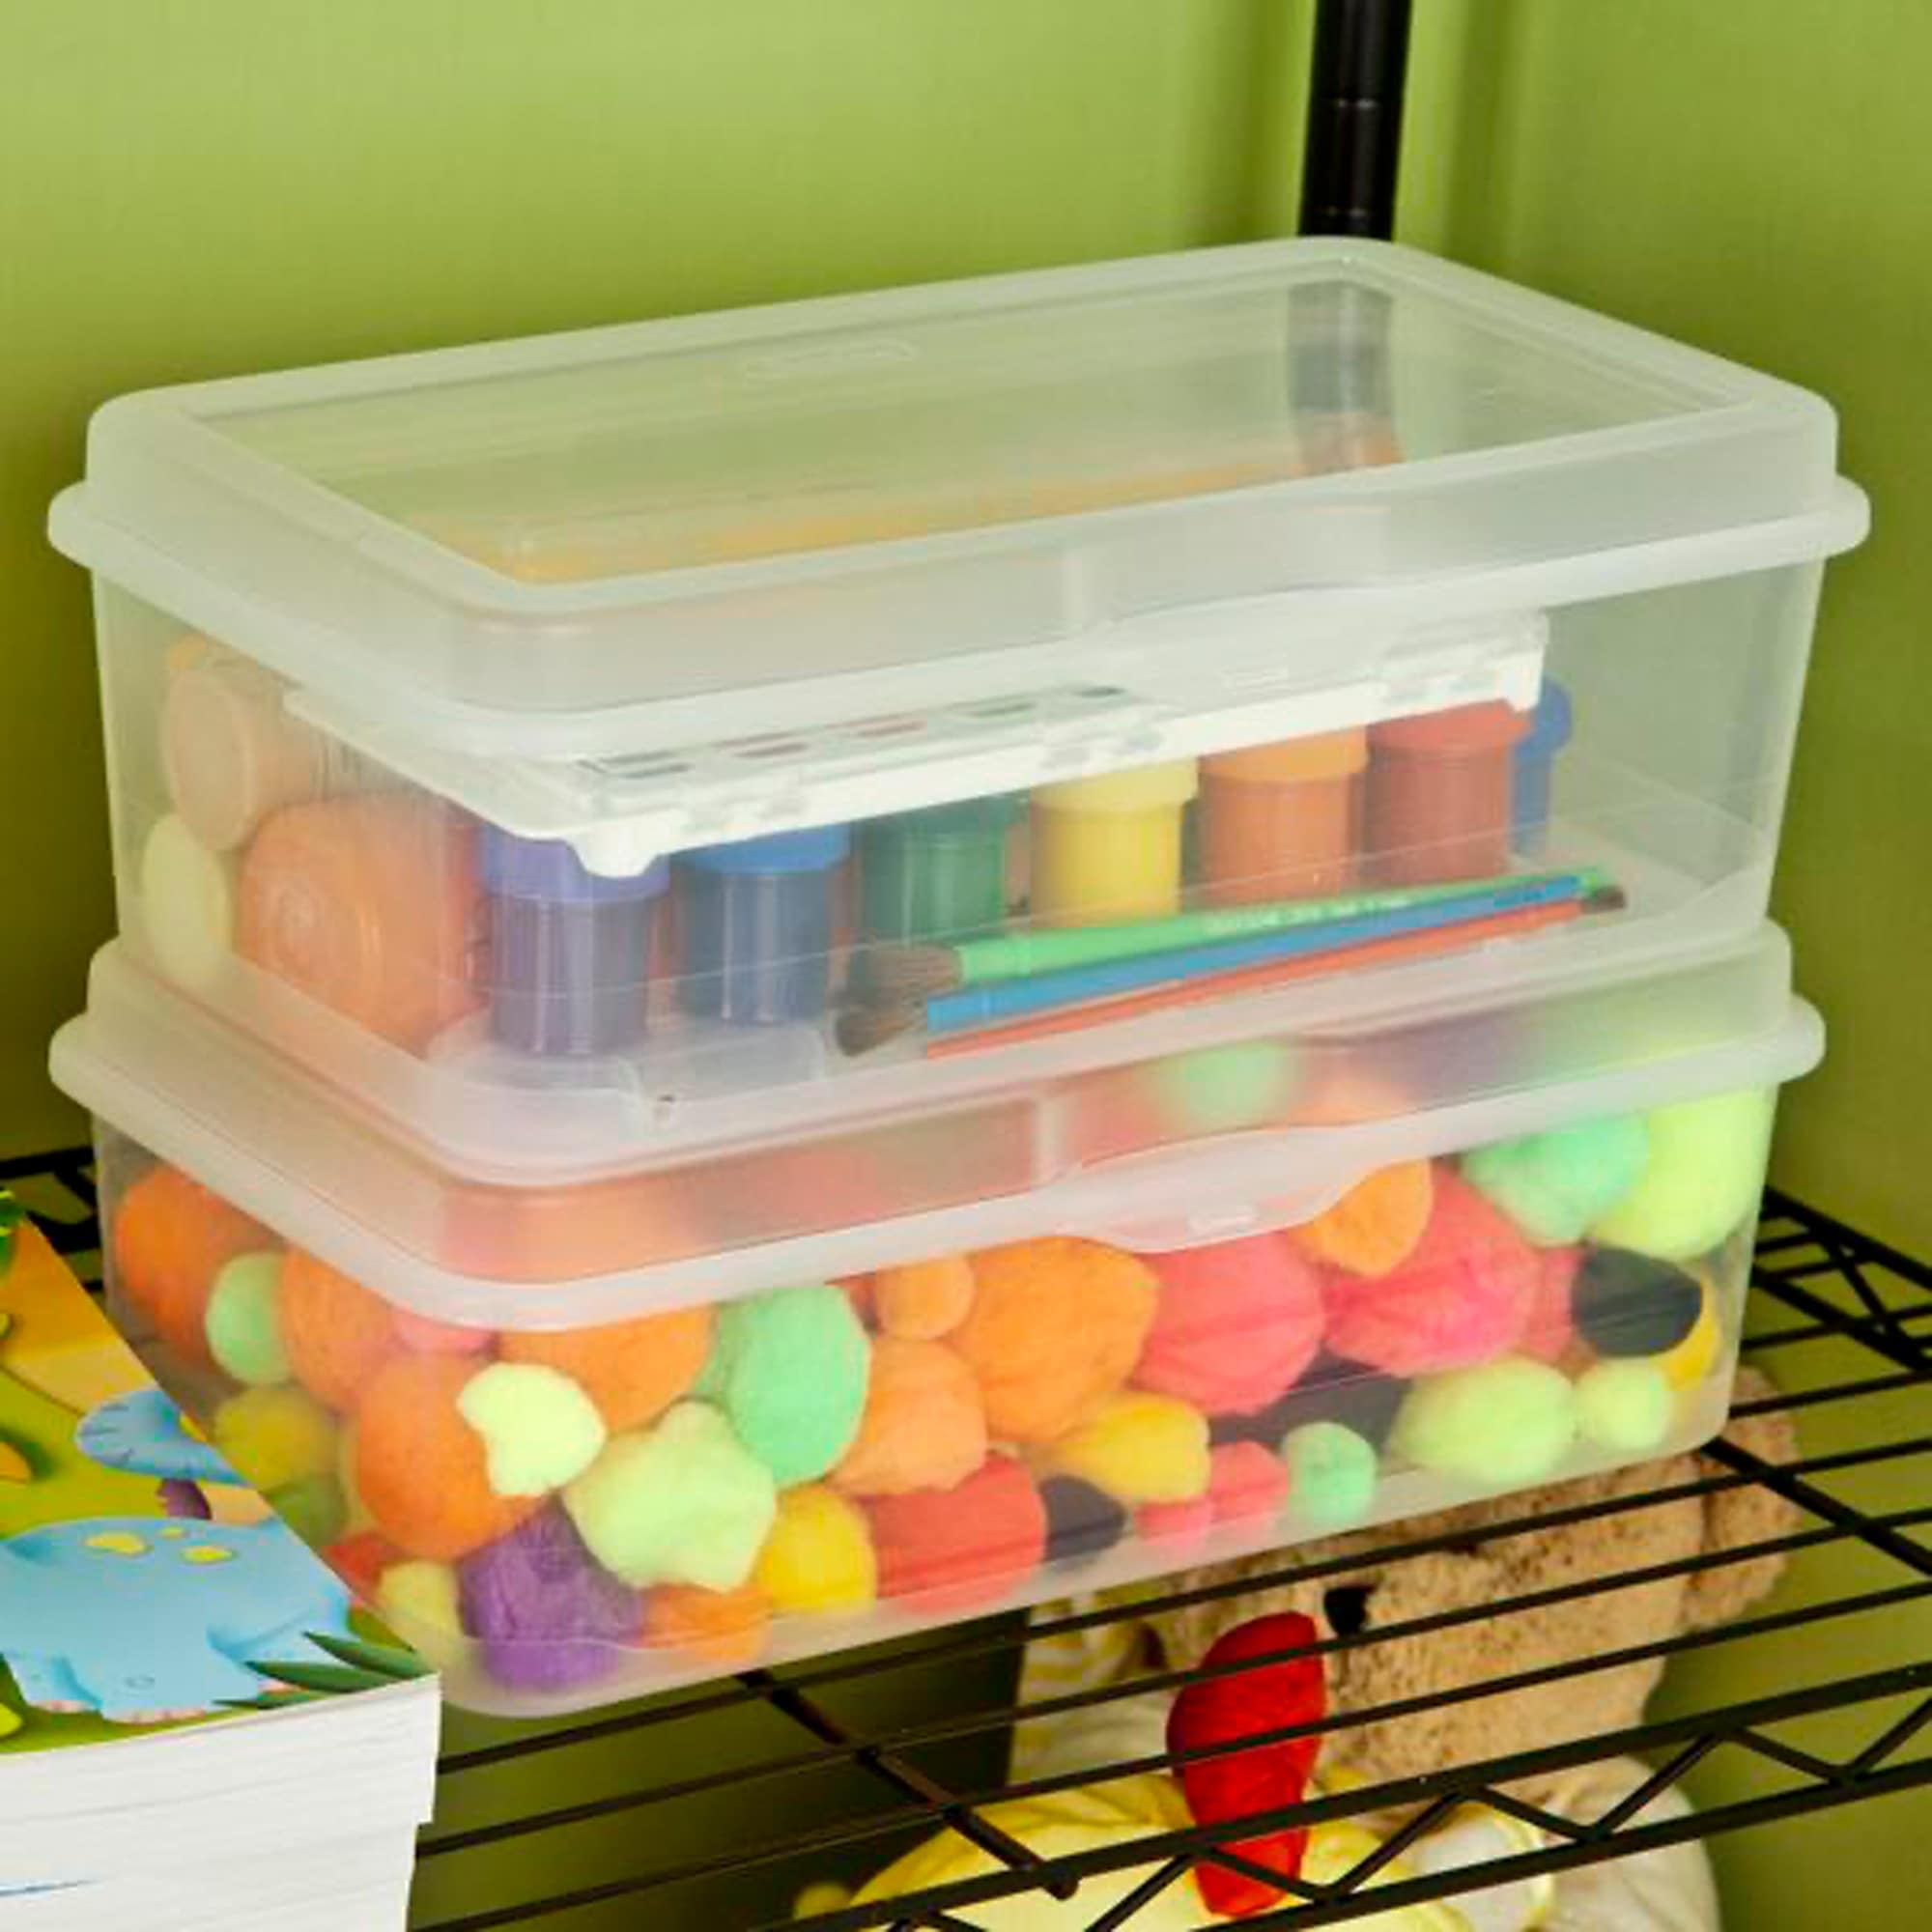 https://ak1.ostkcdn.com/images/products/is/images/direct/cbfc32a5b354c12c960ee68a6fd1fec2ff476973/Sterilite-Plastic-Stacking-FlipTop-Latching-Storage-Box-Container%2C-Clear-18-Pack.jpg